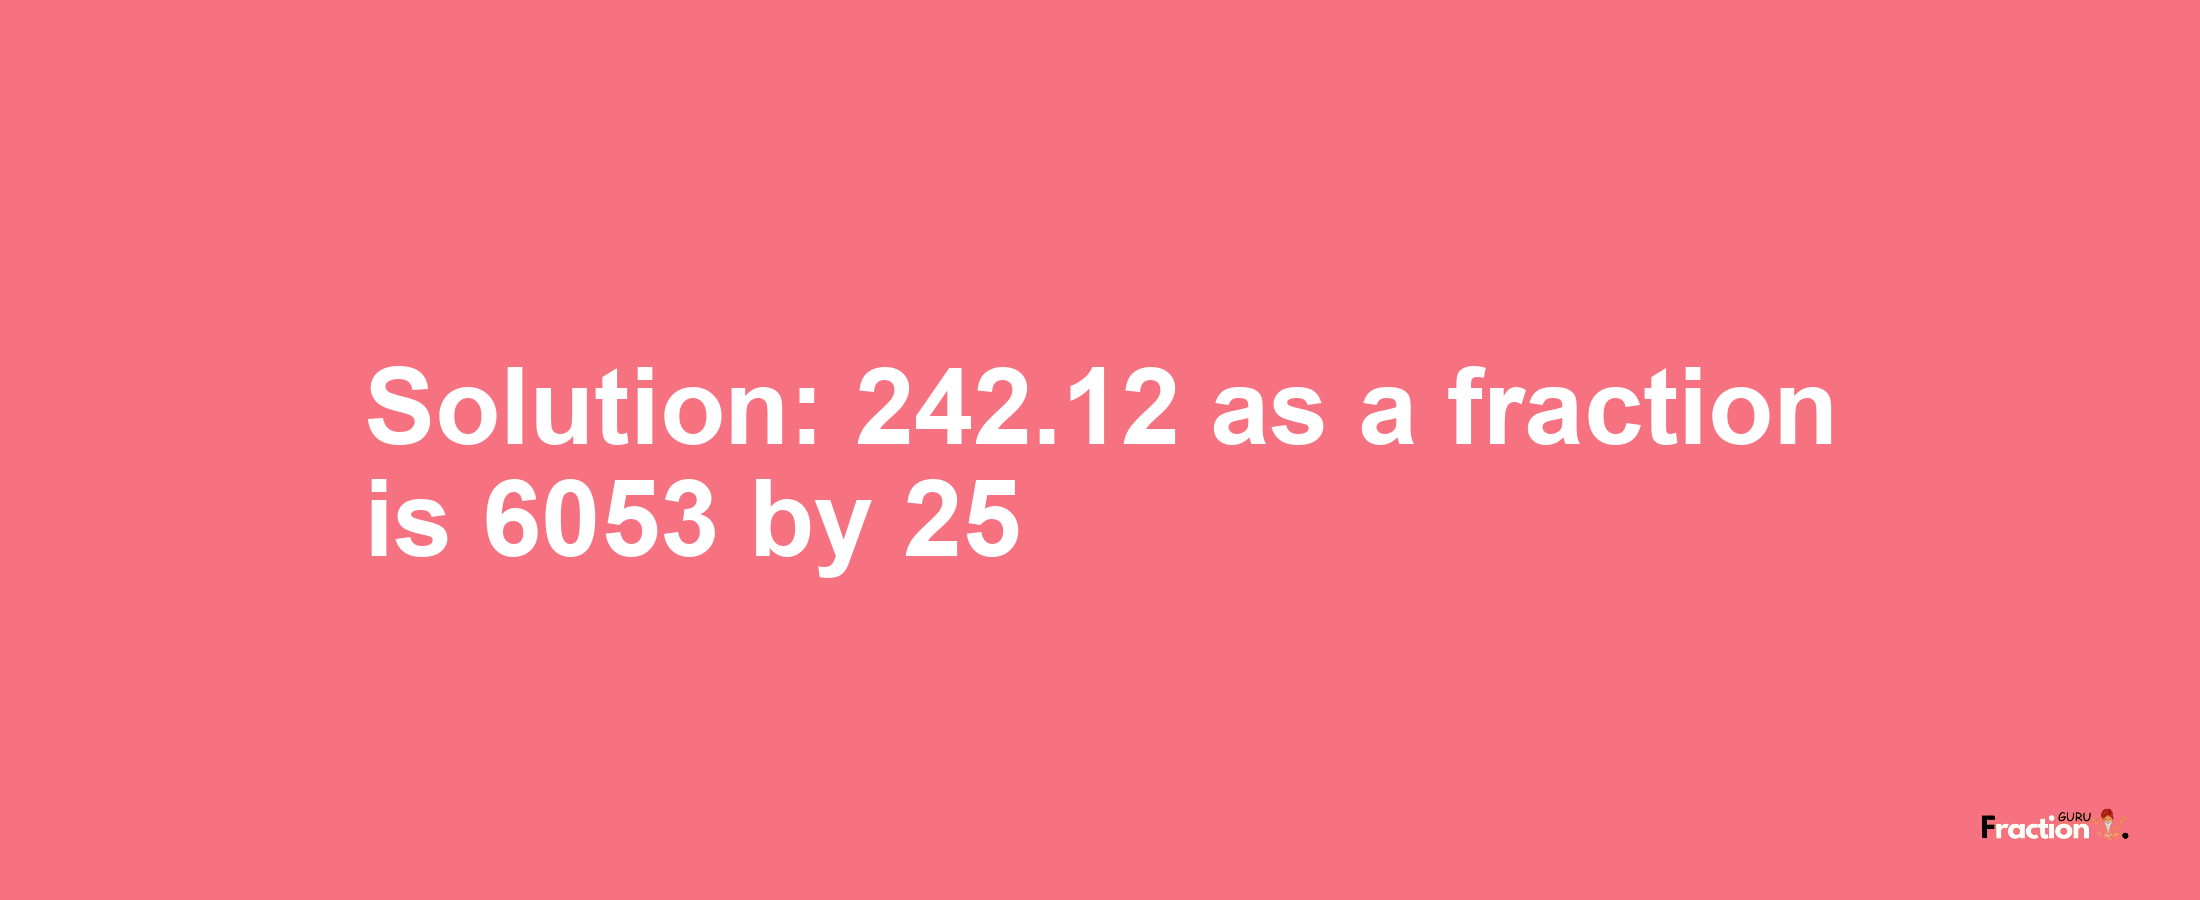 Solution:242.12 as a fraction is 6053/25